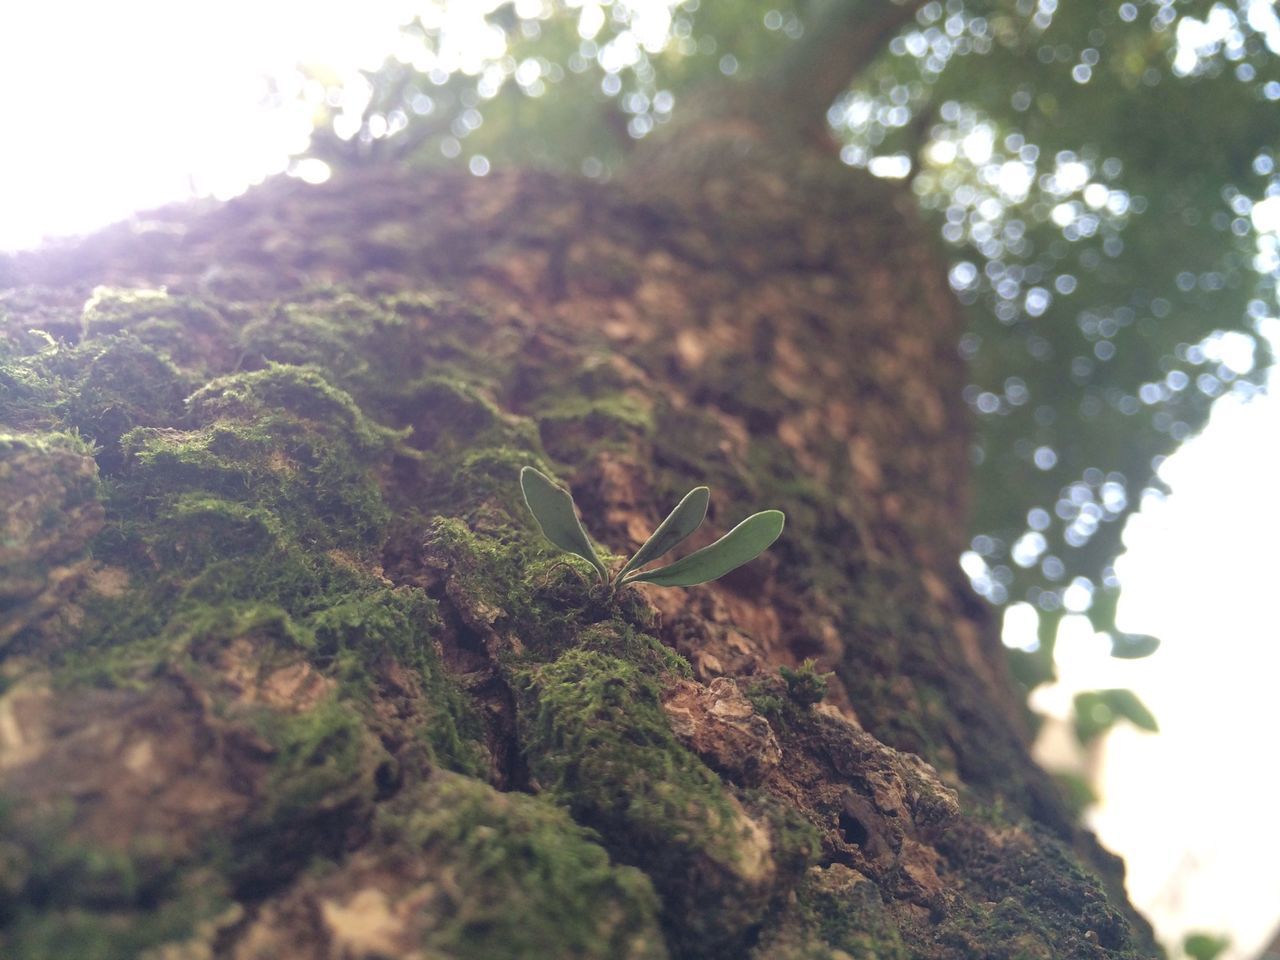 tree, low angle view, nature, focus on foreground, close-up, rock - object, growth, textured, branch, leaf, green color, tree trunk, tranquility, day, beauty in nature, rough, moss, outdoors, sunlight, selective focus